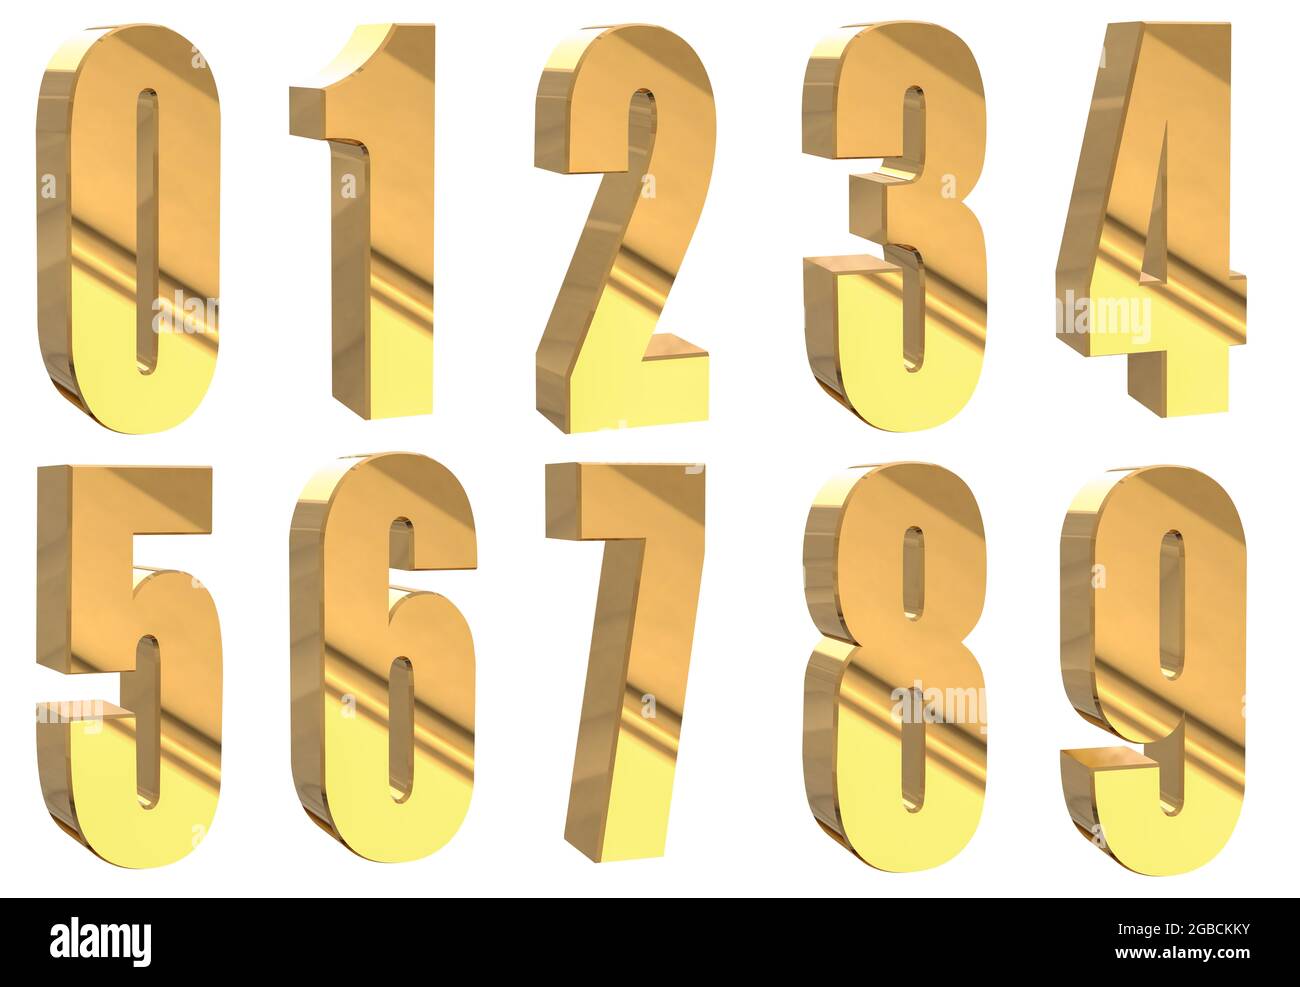 Large size set of high resolution gold metalic 3D numbers Stock Photo